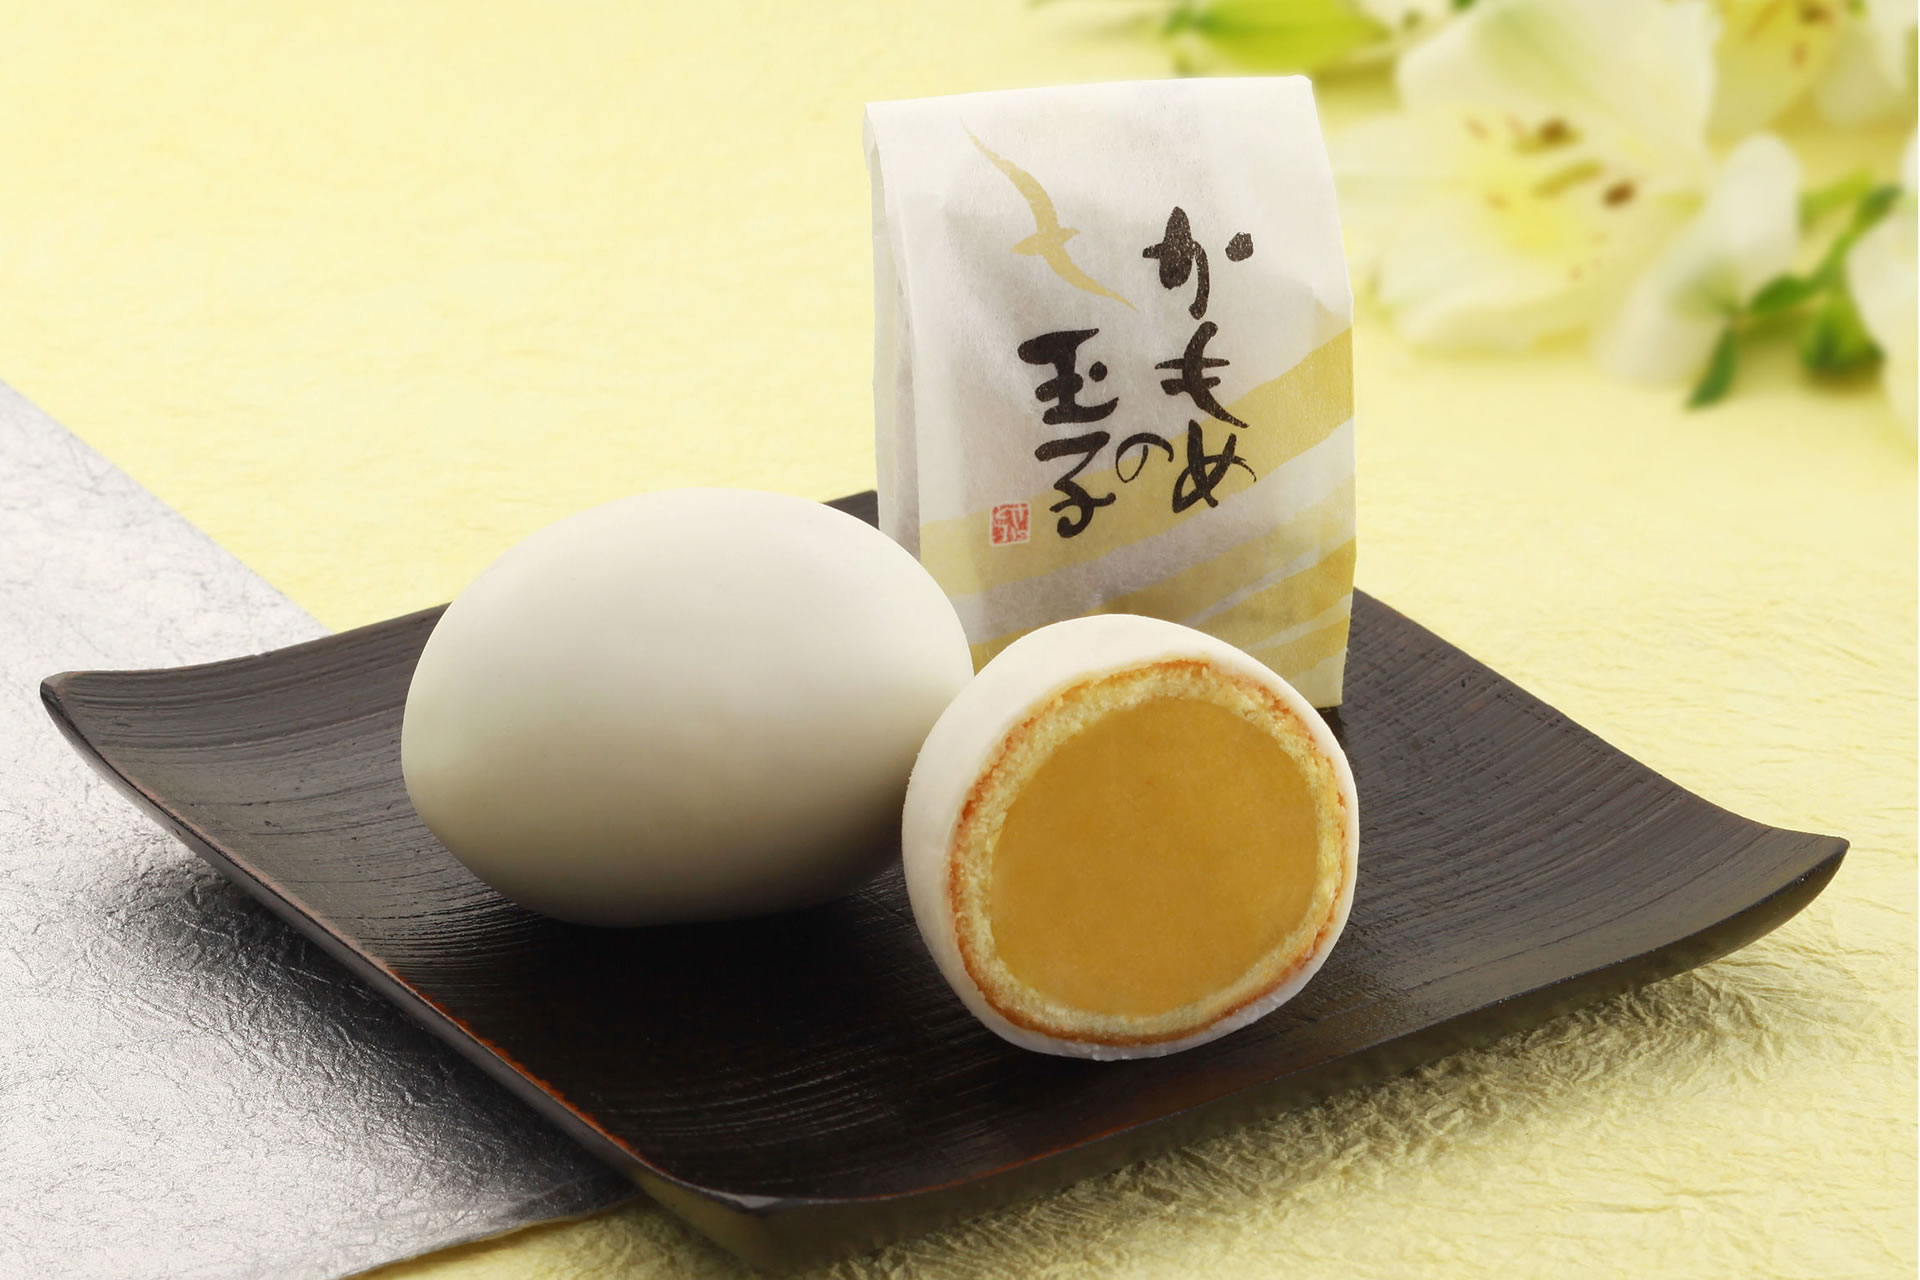 Kamome no Tamago - Seagull eggs (Japanese Desserts - Not real) 